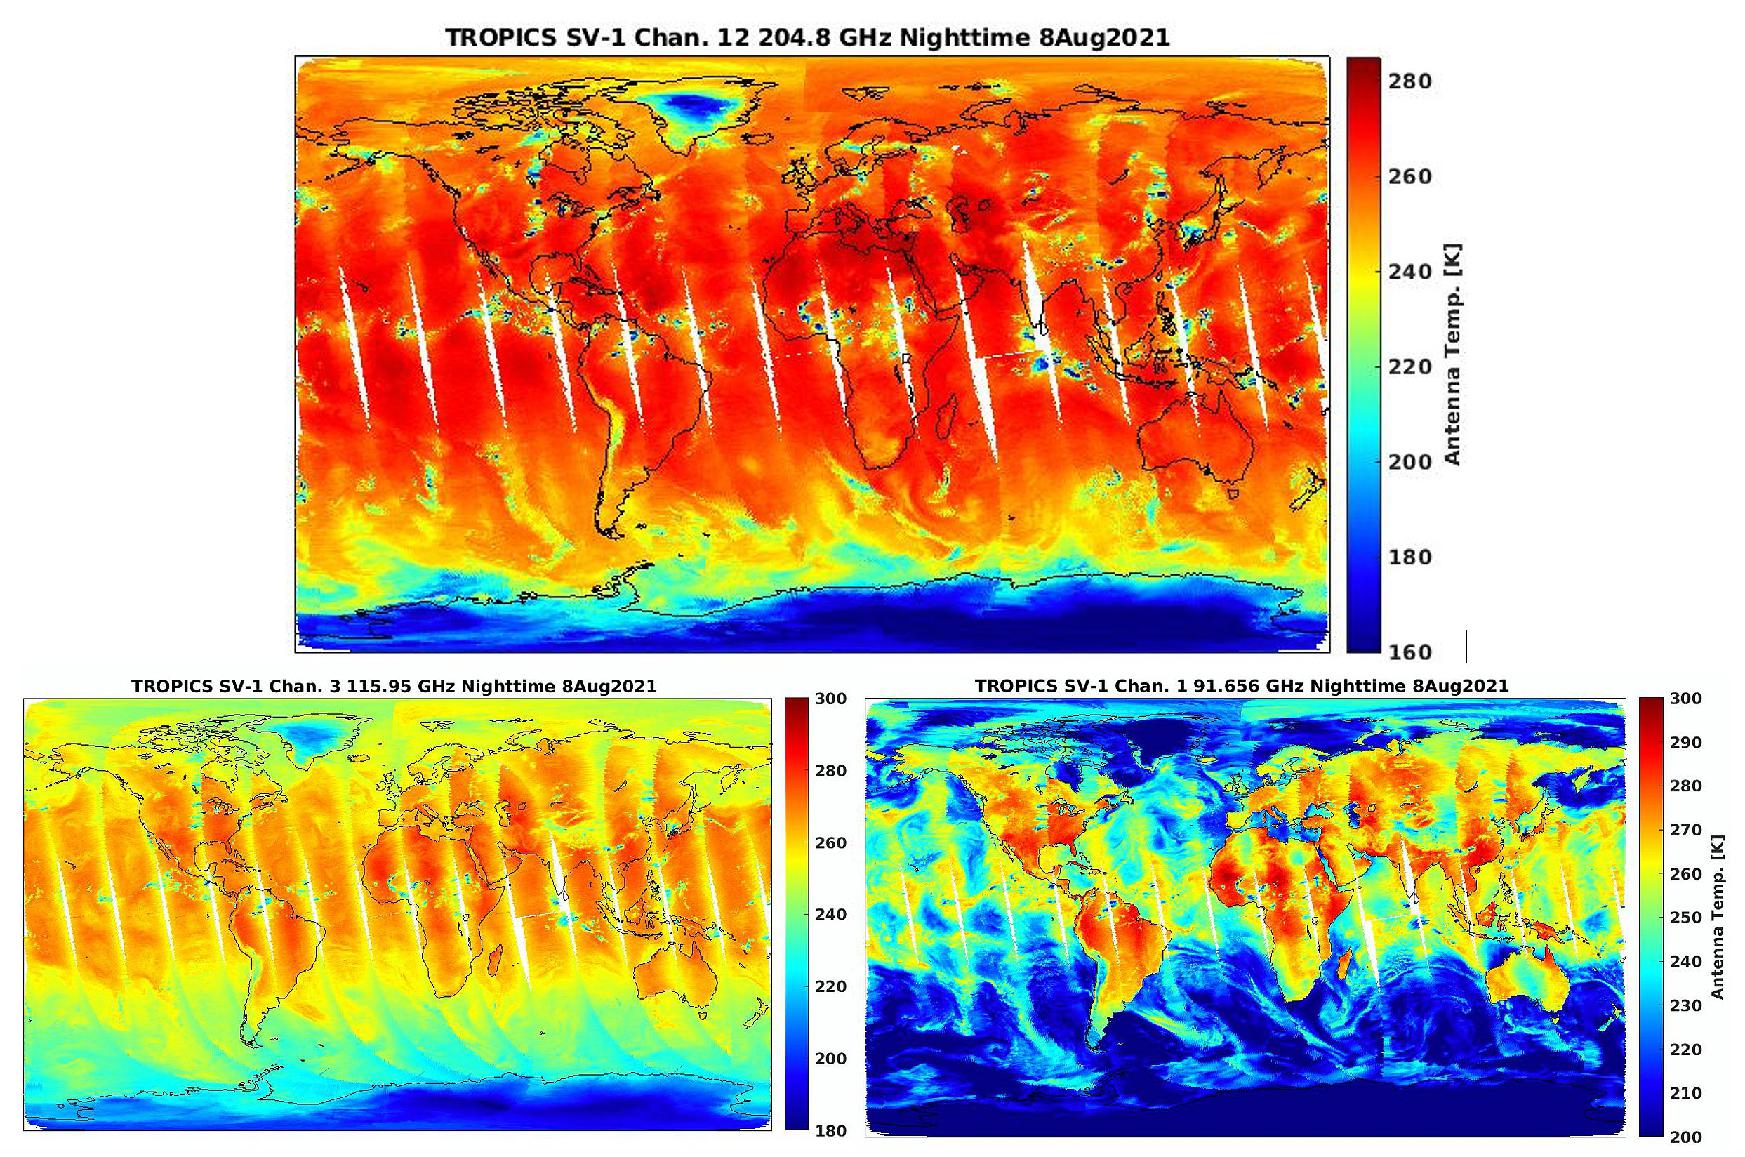 Figure 8: The TROPICS Pathfinder satellite captured its first global data on August 8, 2021, including a channel around 205 GHz (top). It's the first time a frequency higher than 190 GHz has been used on a spaceborne microwave cross-track sounder instrument, which collects temperature and water vapor data using microwave radiance observations (image credits: NASA / TROPICS Pathfinder satellite)